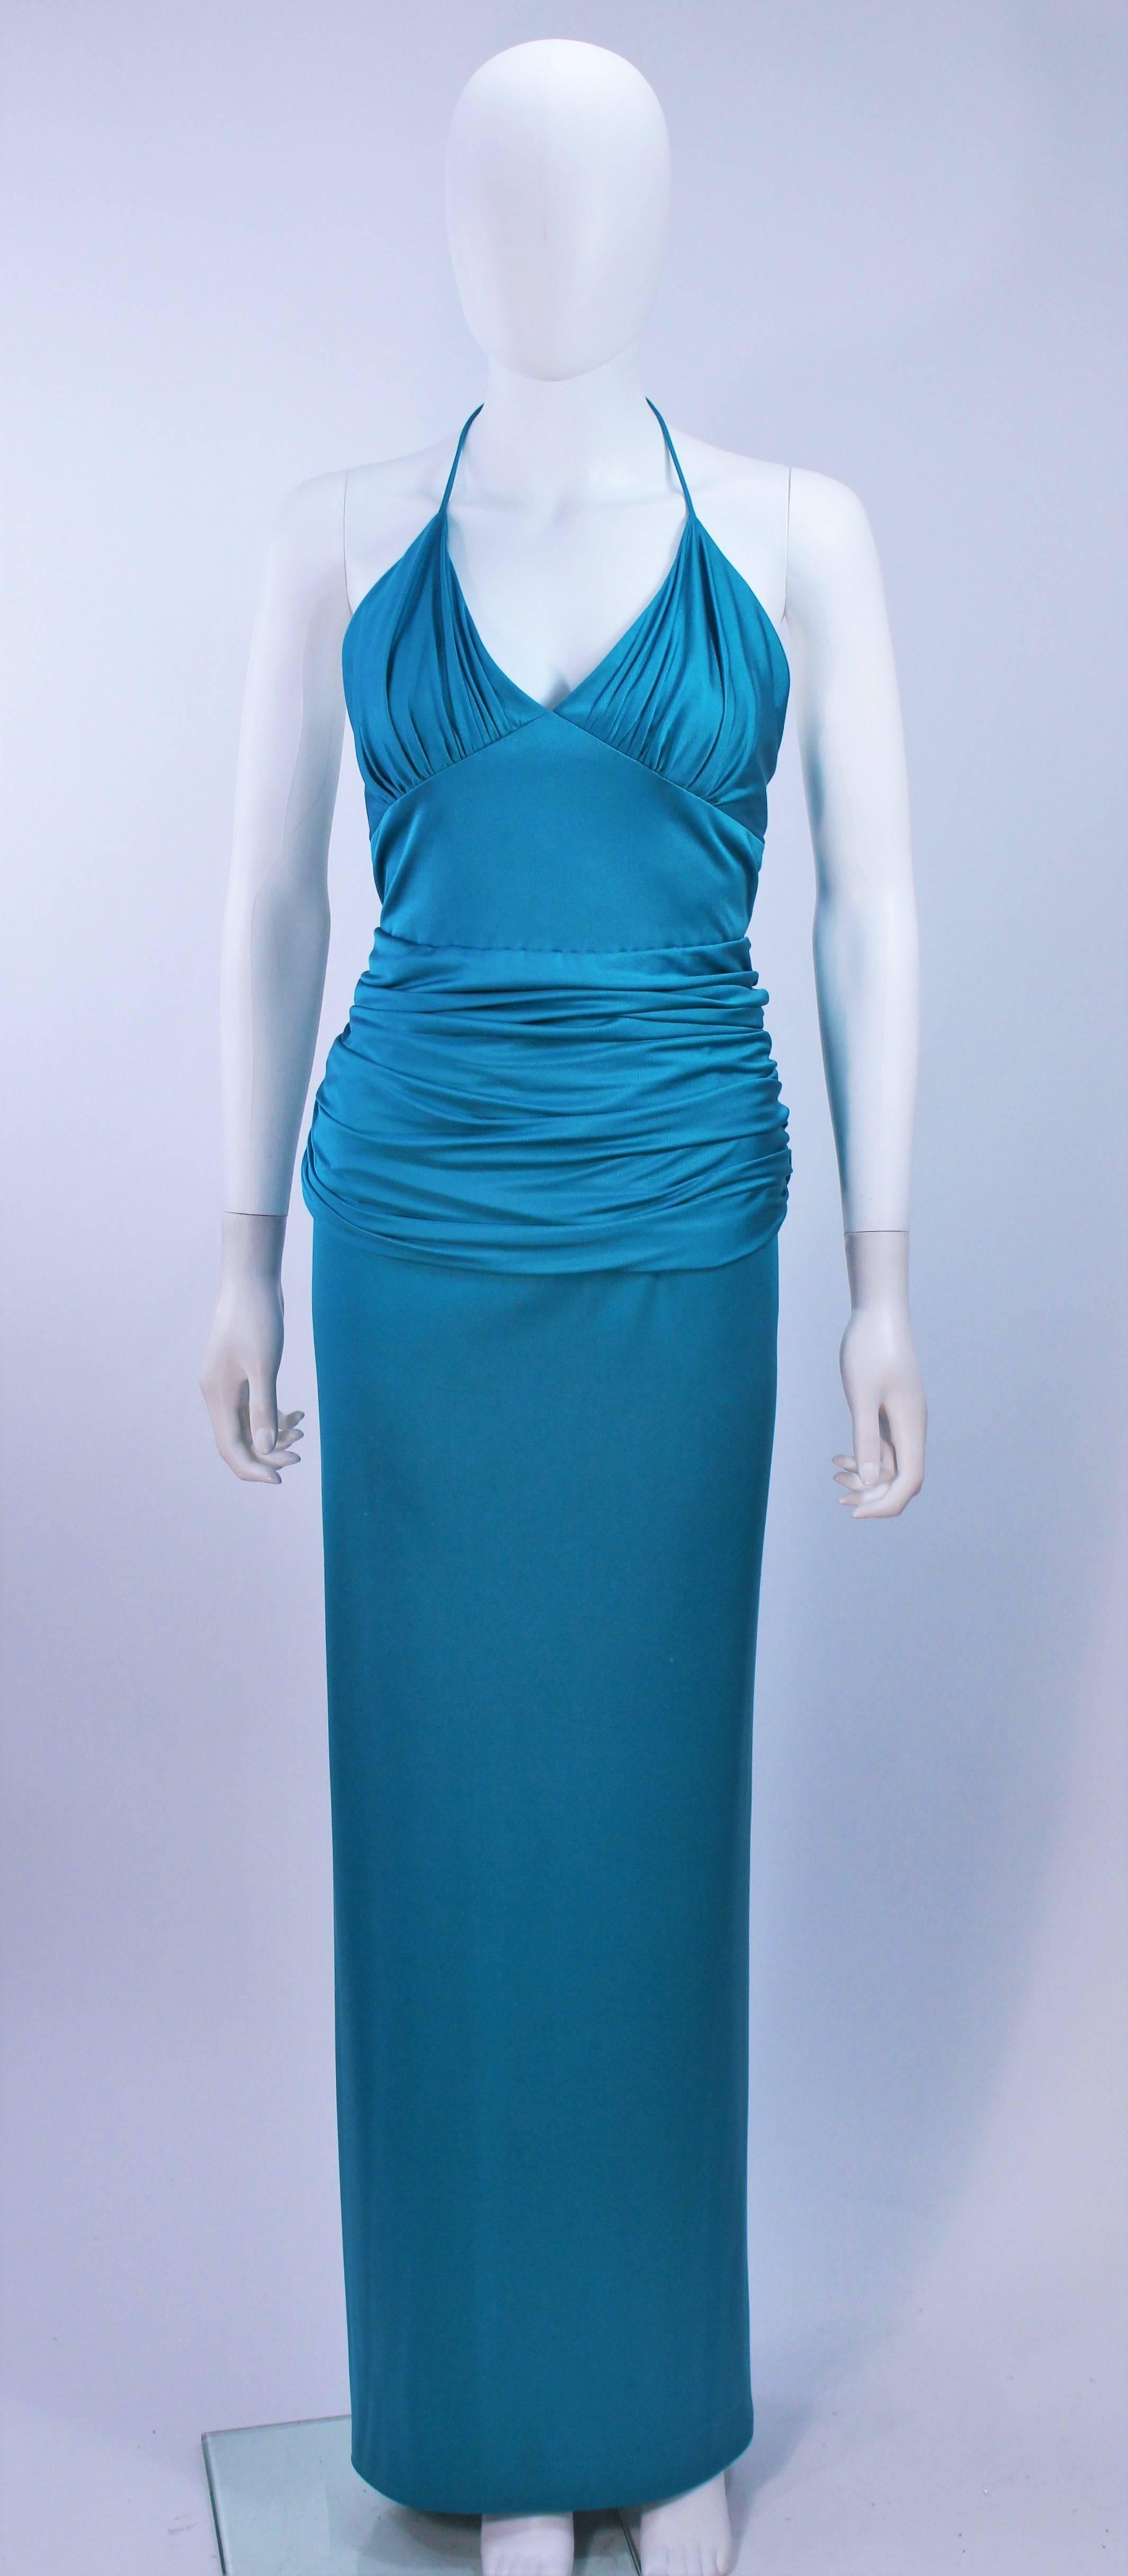 This Elizabeth Mason Couture dress is fashioned from the finest silk jersey. This fabulous halter design is effortlessly chic and can be custom made in a variety of colors. Made in Beverly Hills.

This is a couture custom order. Please allow for a